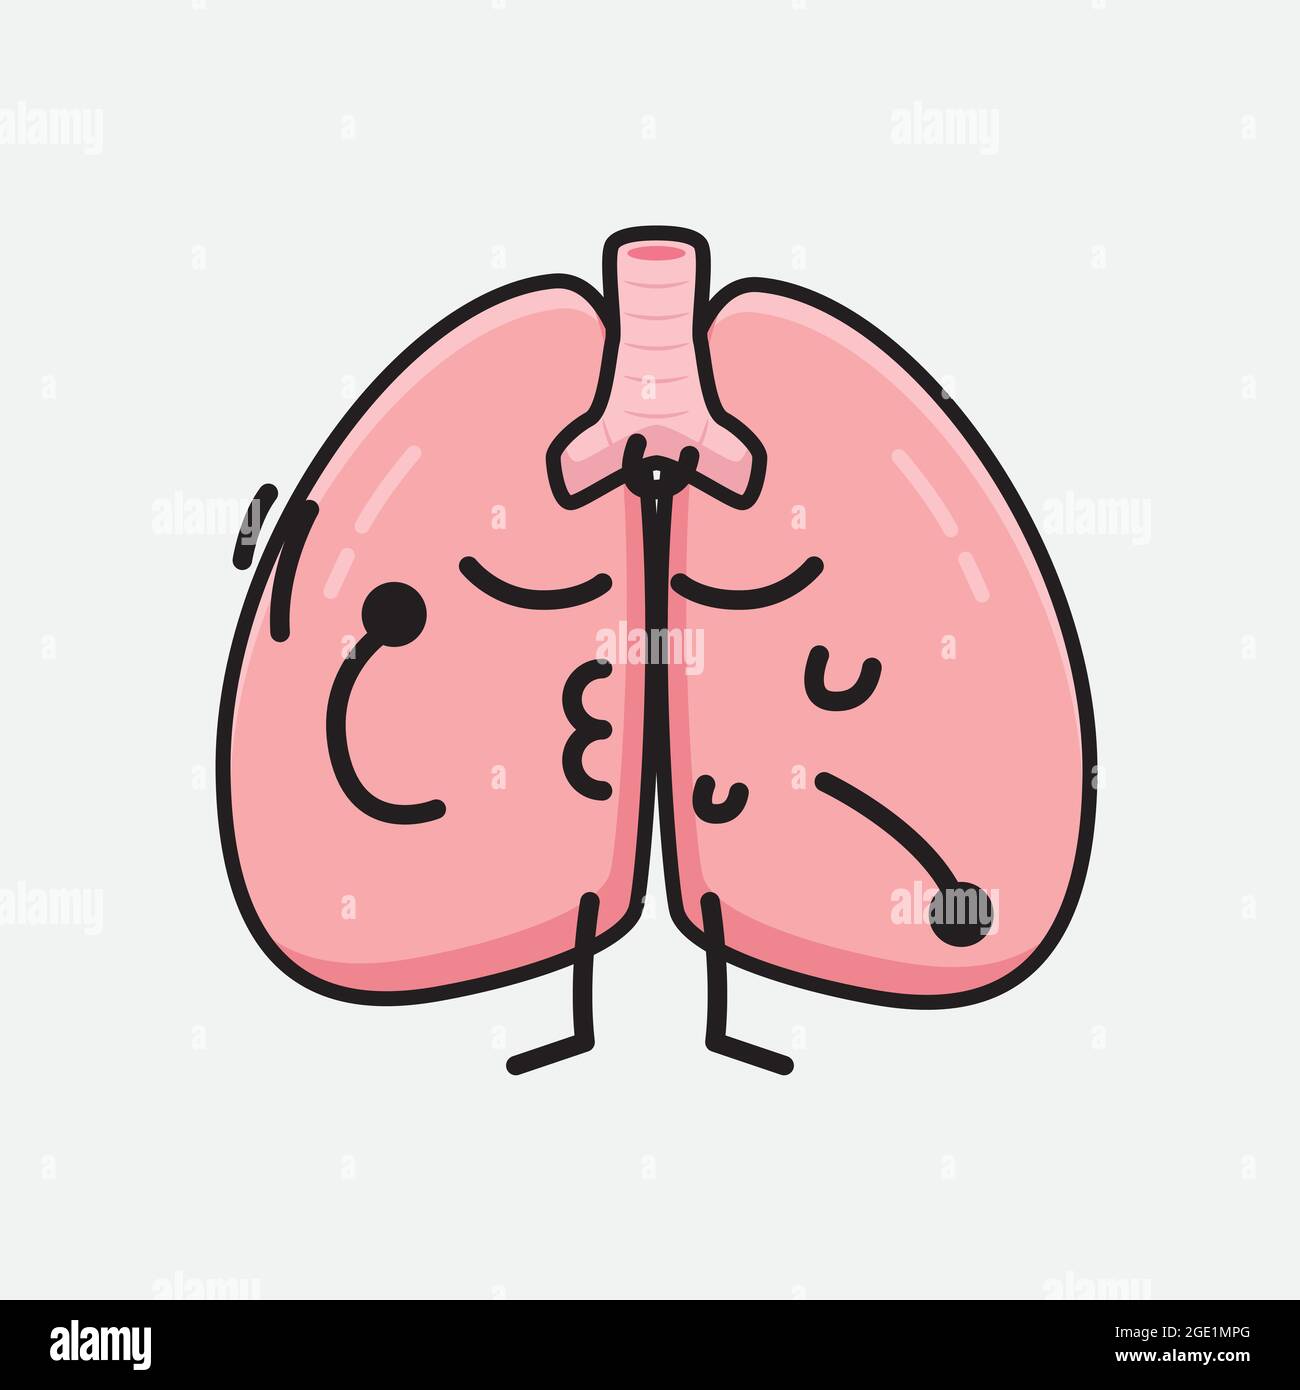 How to Draw Lungs | Step-By-Step Guide to Draw the Lungs